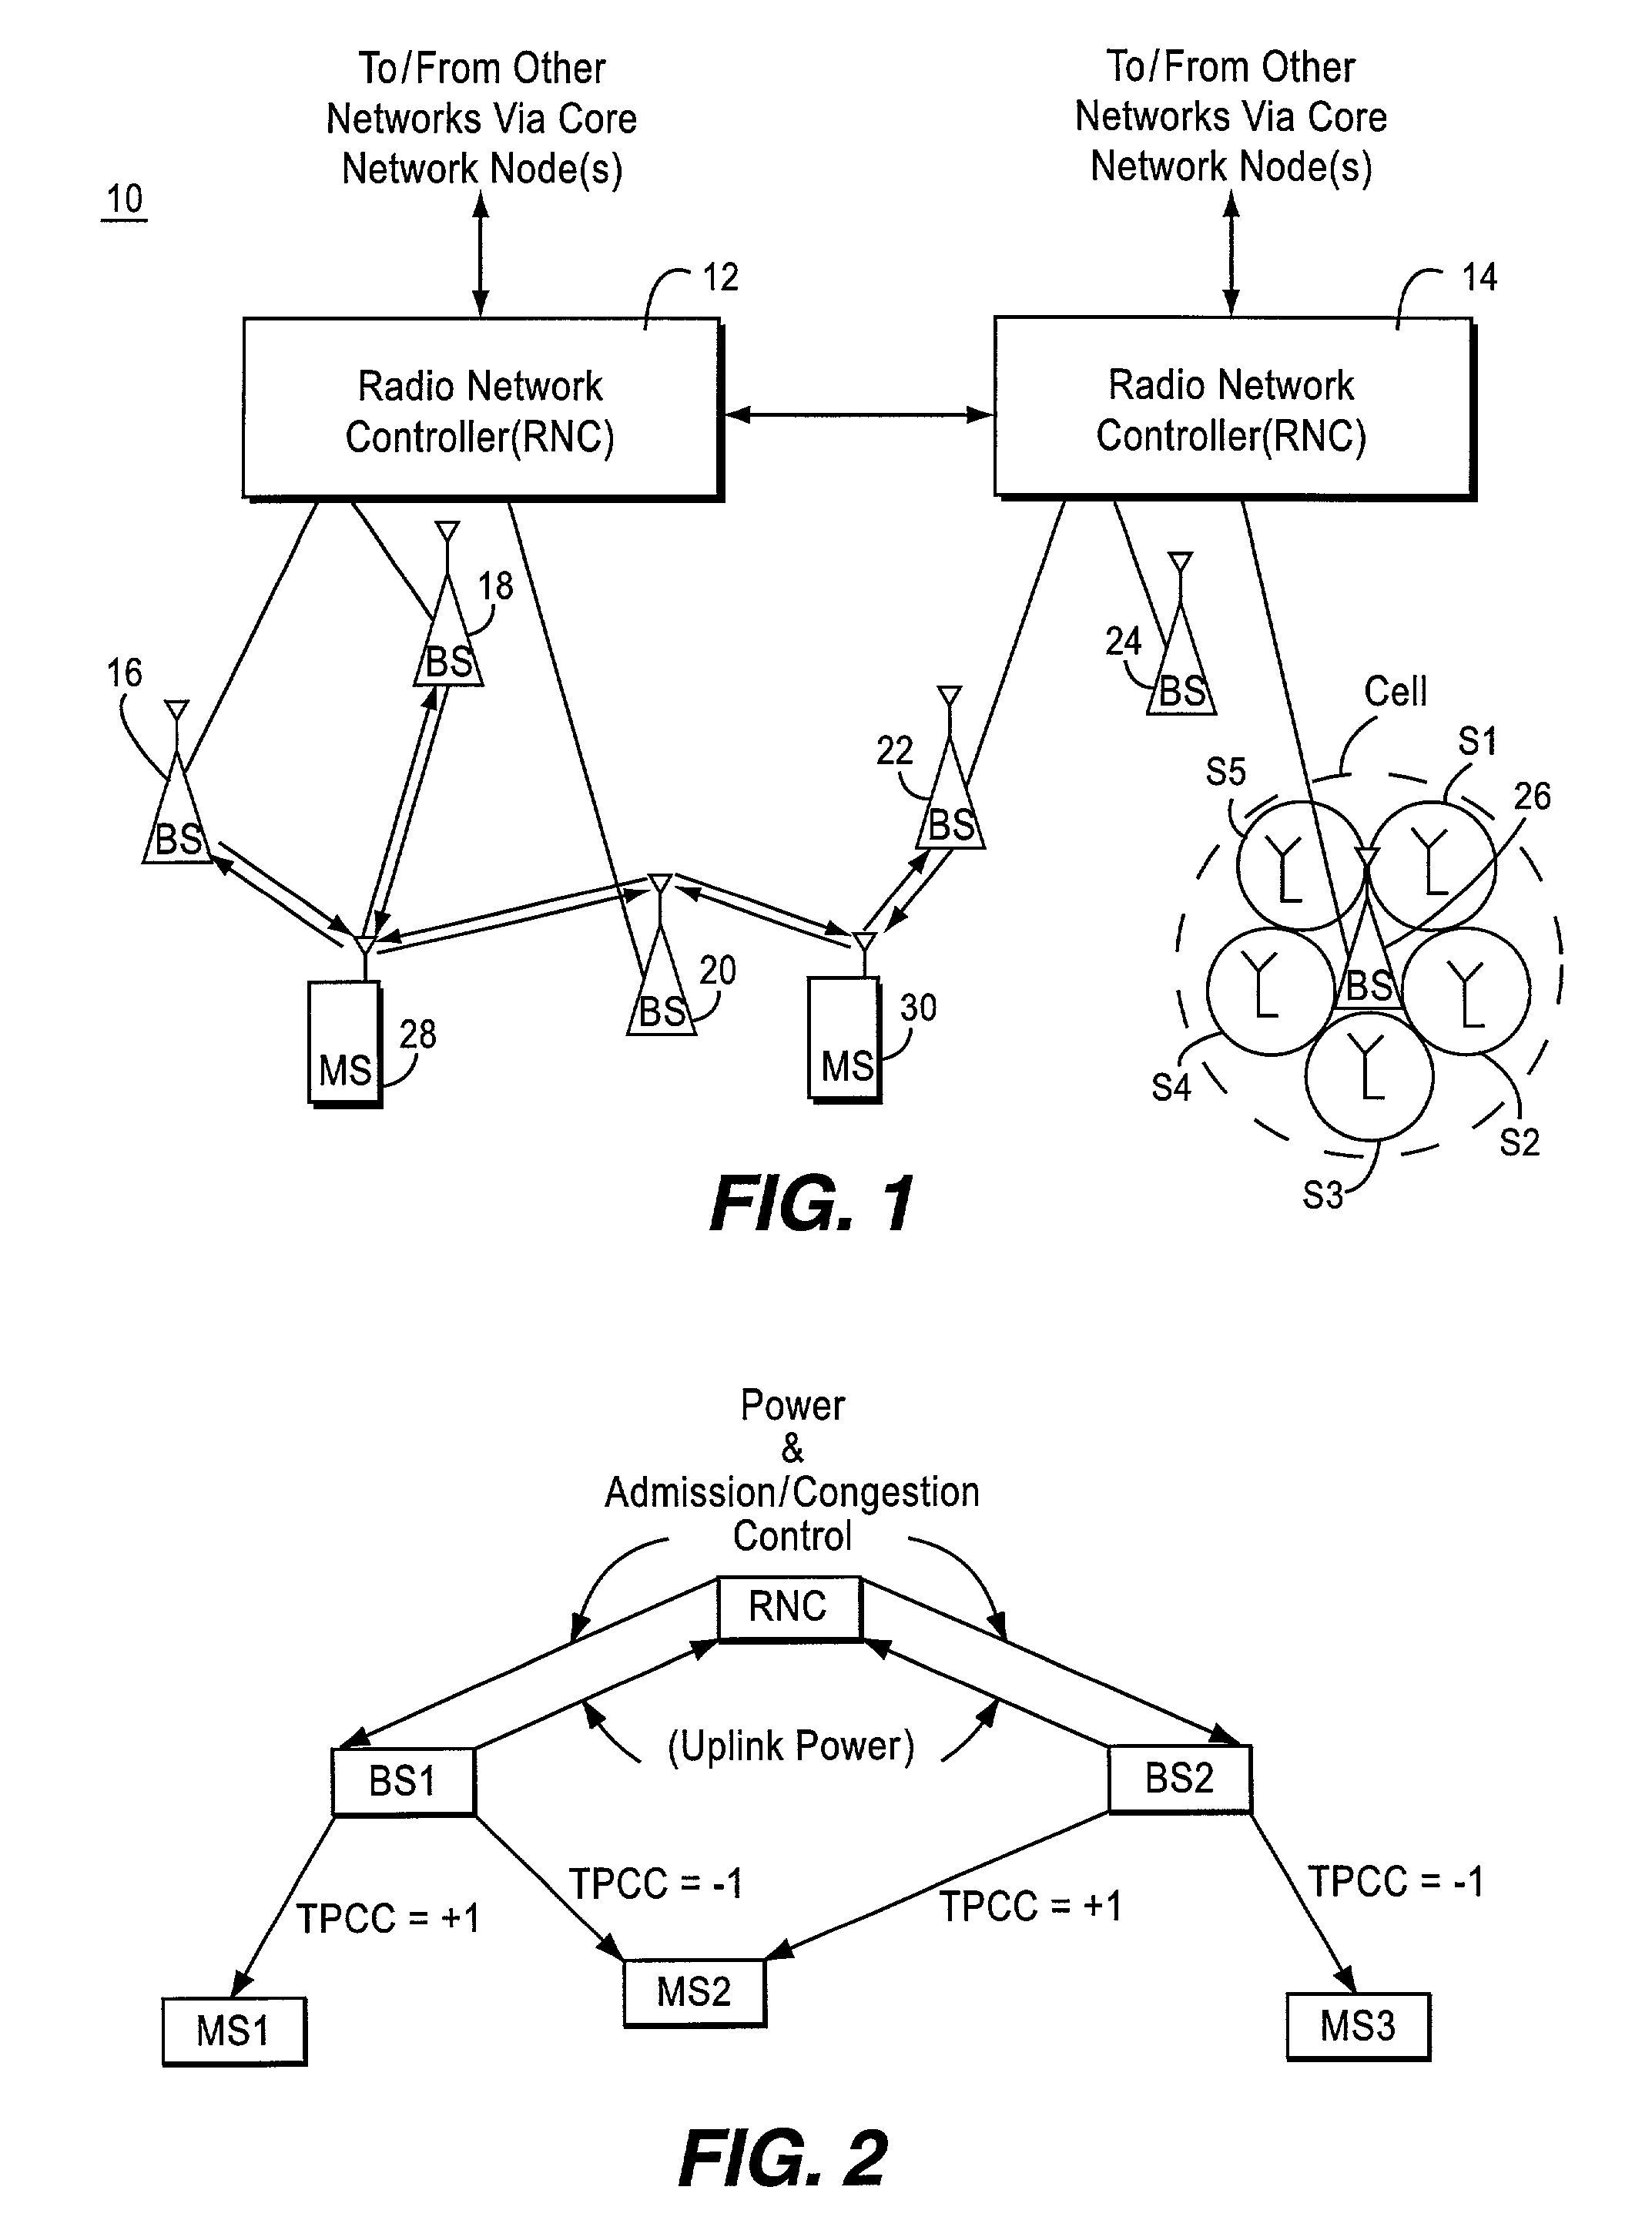 Congestion control in a CDMA-based mobile radio communications system